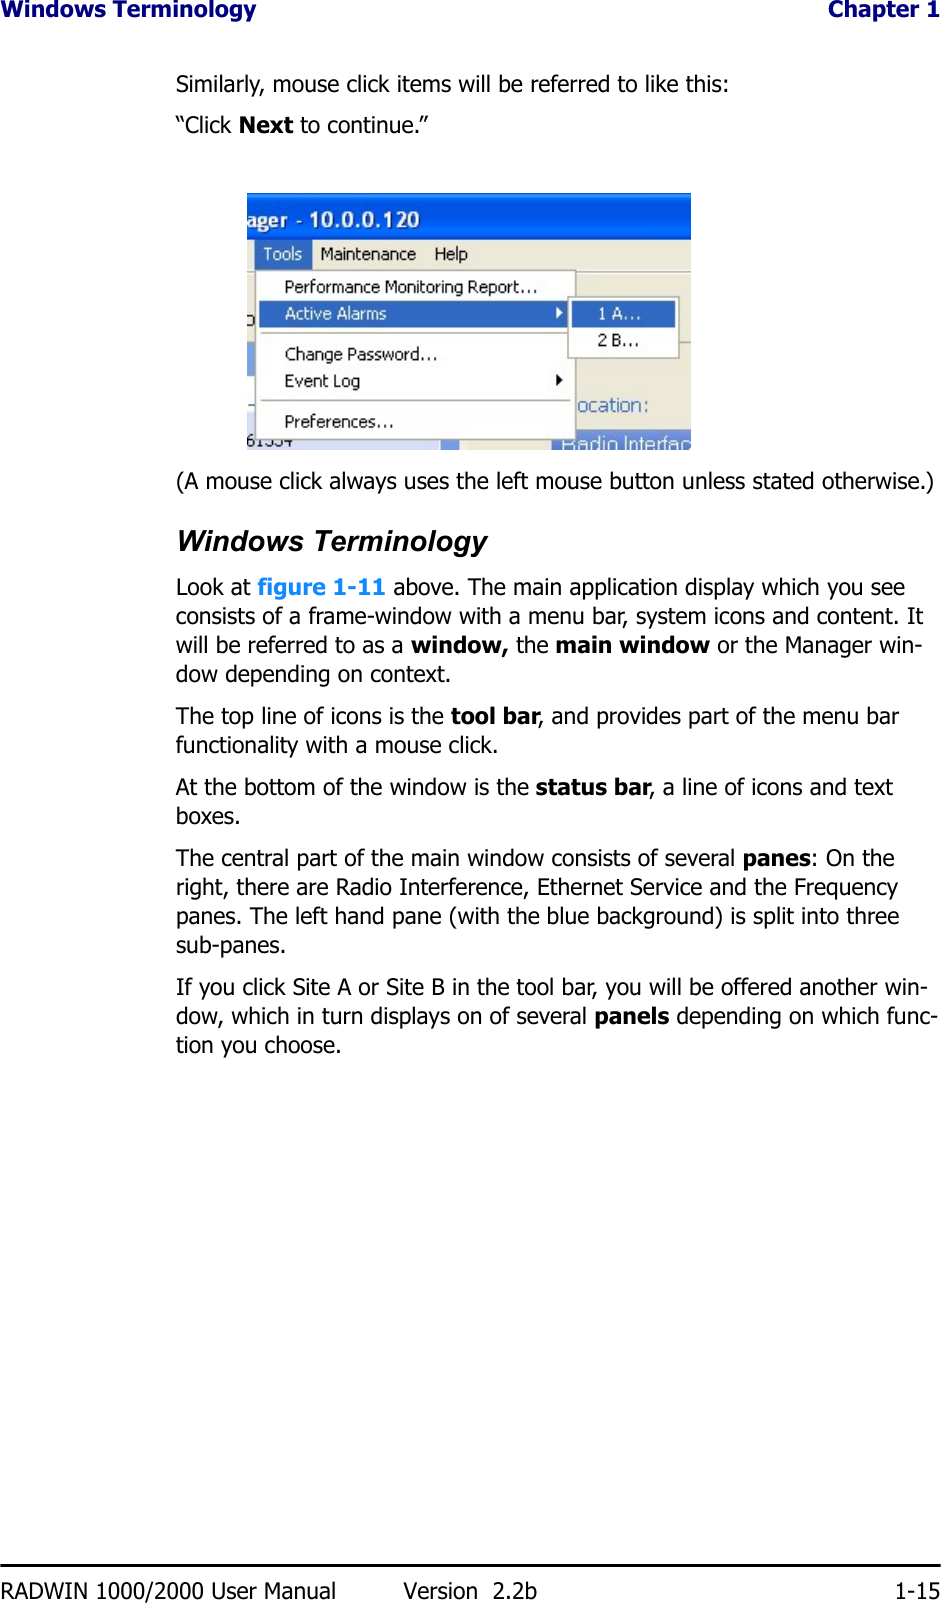 Windows Terminology  Chapter 1RADWIN 1000/2000 User Manual Version  2.2b 1-15Similarly, mouse click items will be referred to like this:“Click Next to continue.”(A mouse click always uses the left mouse button unless stated otherwise.)Windows TerminologyLook at figure 1-11 above. The main application display which you see consists of a frame-window with a menu bar, system icons and content. It will be referred to as a window, the main window or the Manager win-dow depending on context.The top line of icons is the tool bar, and provides part of the menu bar functionality with a mouse click.At the bottom of the window is the status bar, a line of icons and text boxes.The central part of the main window consists of several panes: On the right, there are Radio Interference, Ethernet Service and the Frequency panes. The left hand pane (with the blue background) is split into three sub-panes.If you click Site A or Site B in the tool bar, you will be offered another win-dow, which in turn displays on of several panels depending on which func-tion you choose.